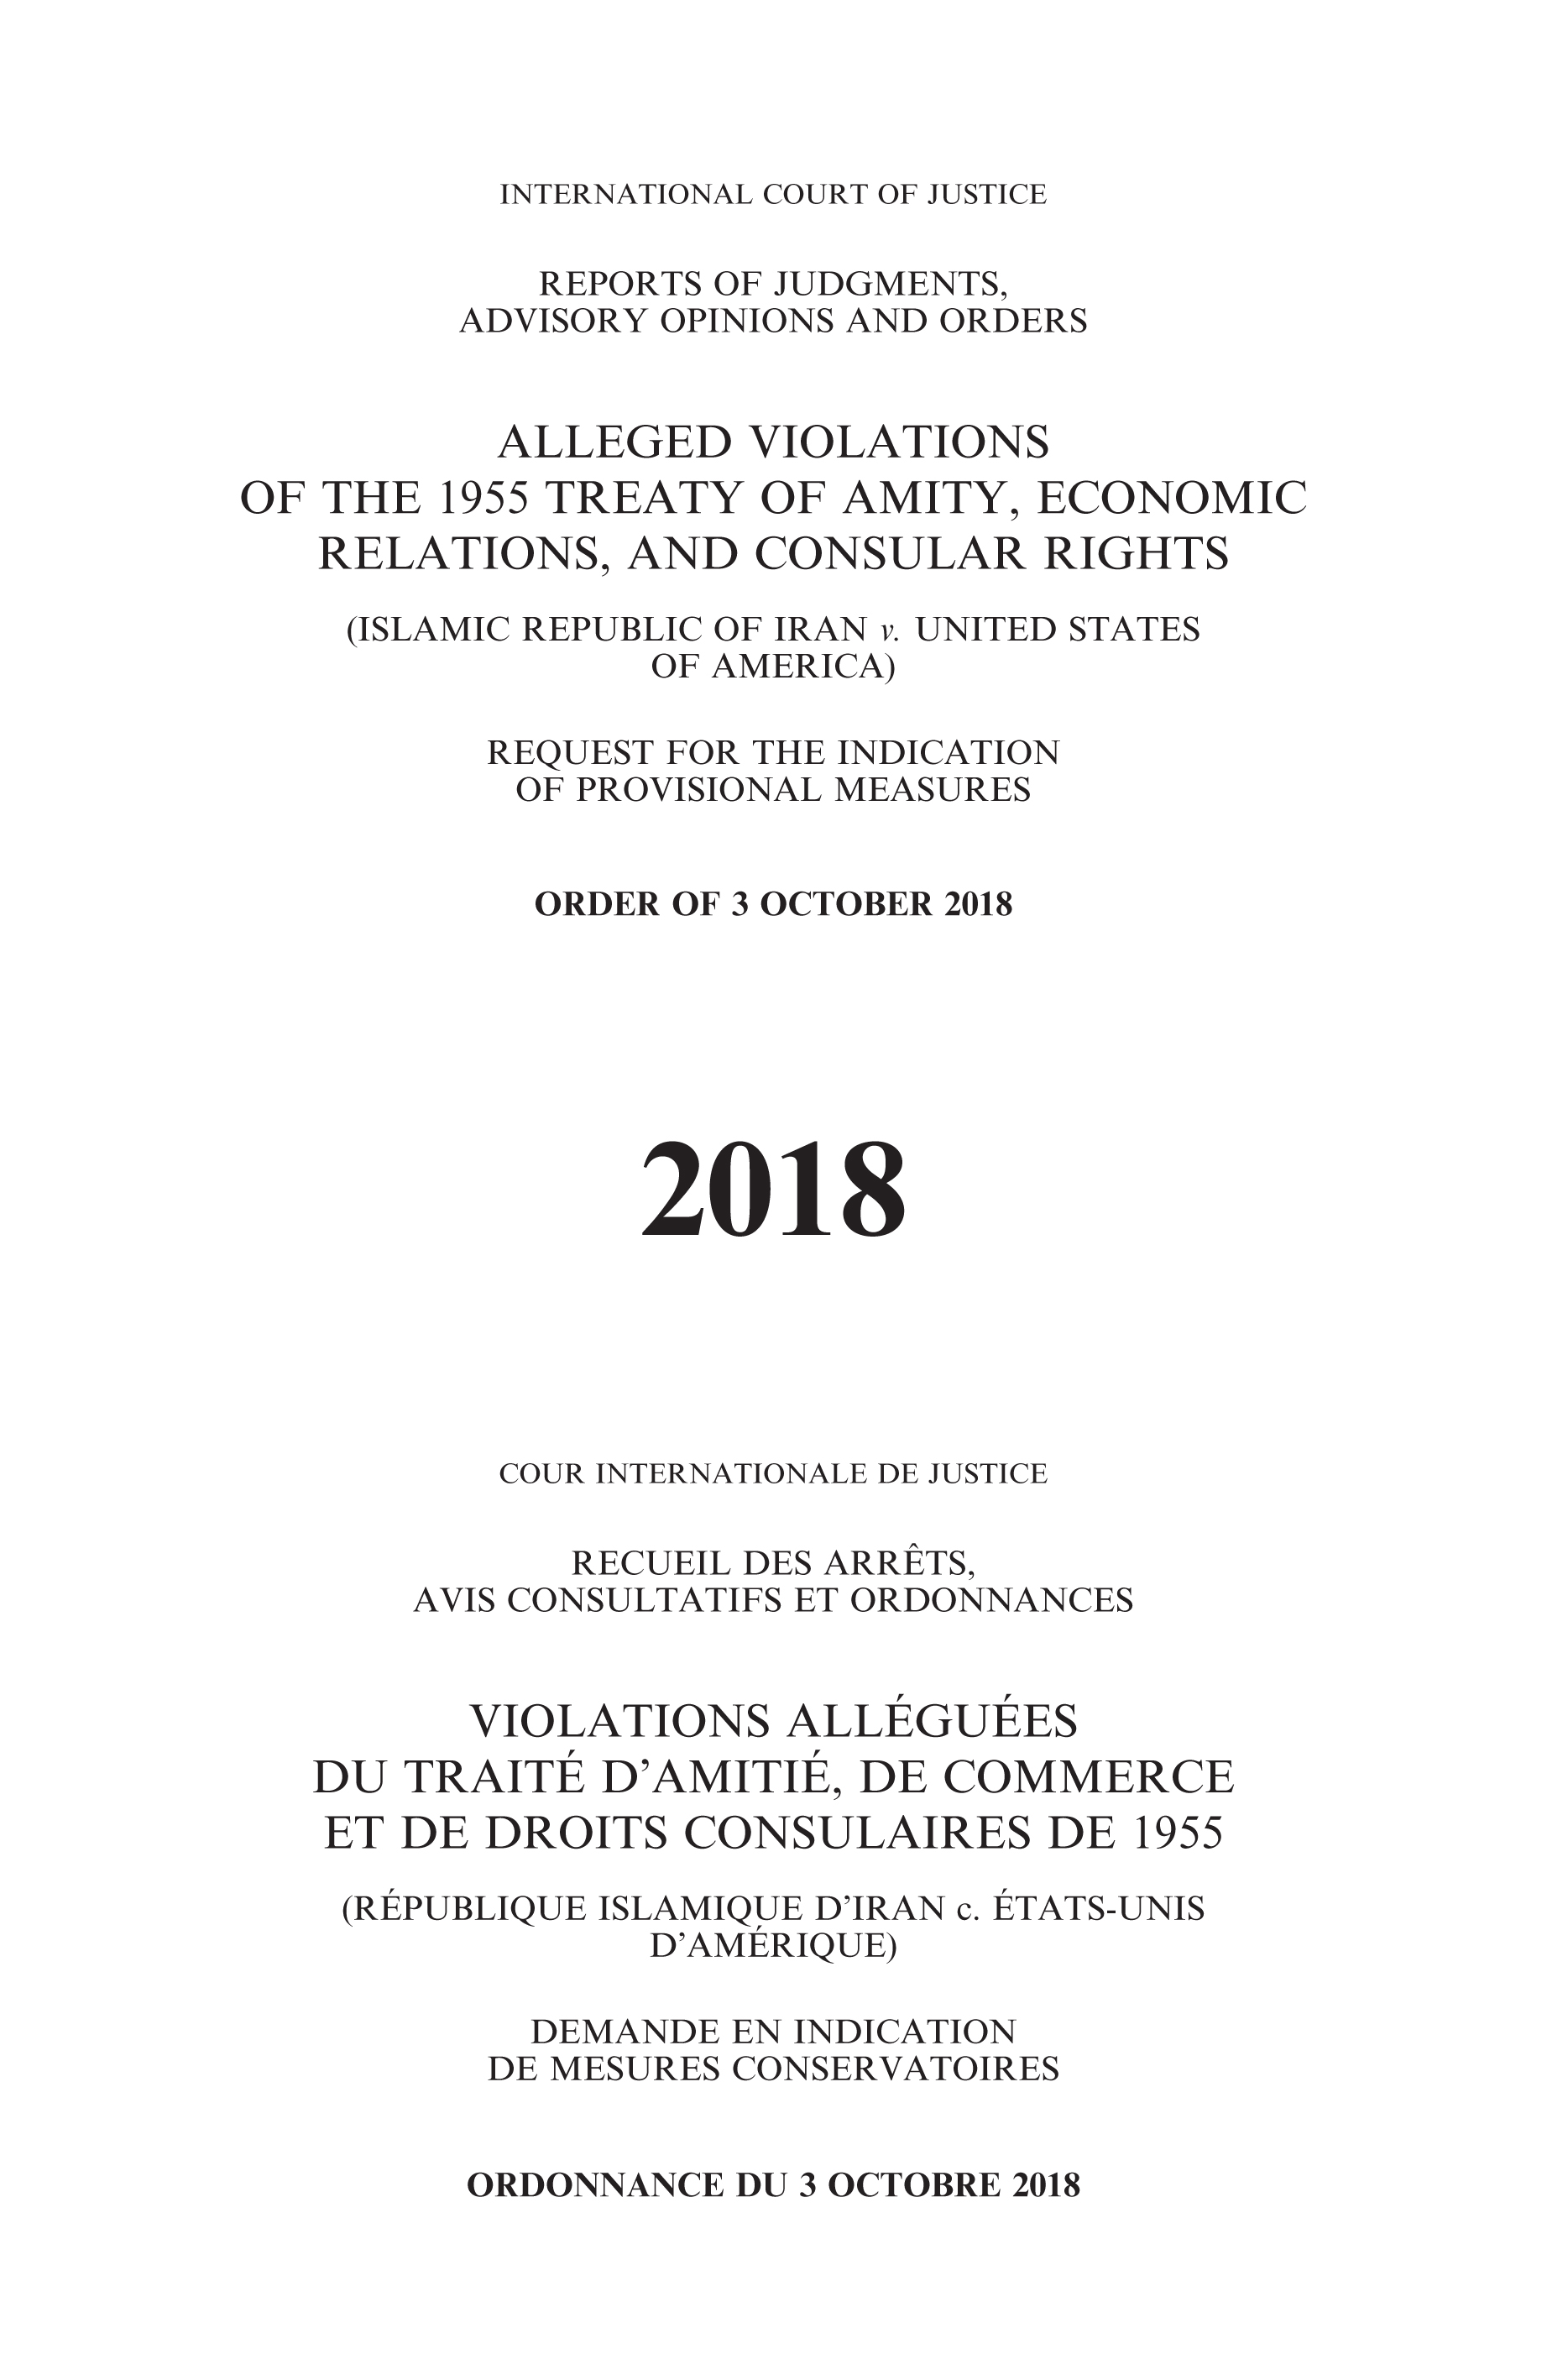 image of Reports of Judgments, Advisory Opinions and Orders: Alleged Violations of the 1955 Treaty of Amity, Economic Relations, and Consular Rights (Islamic Republic of Iran v. United States of America)